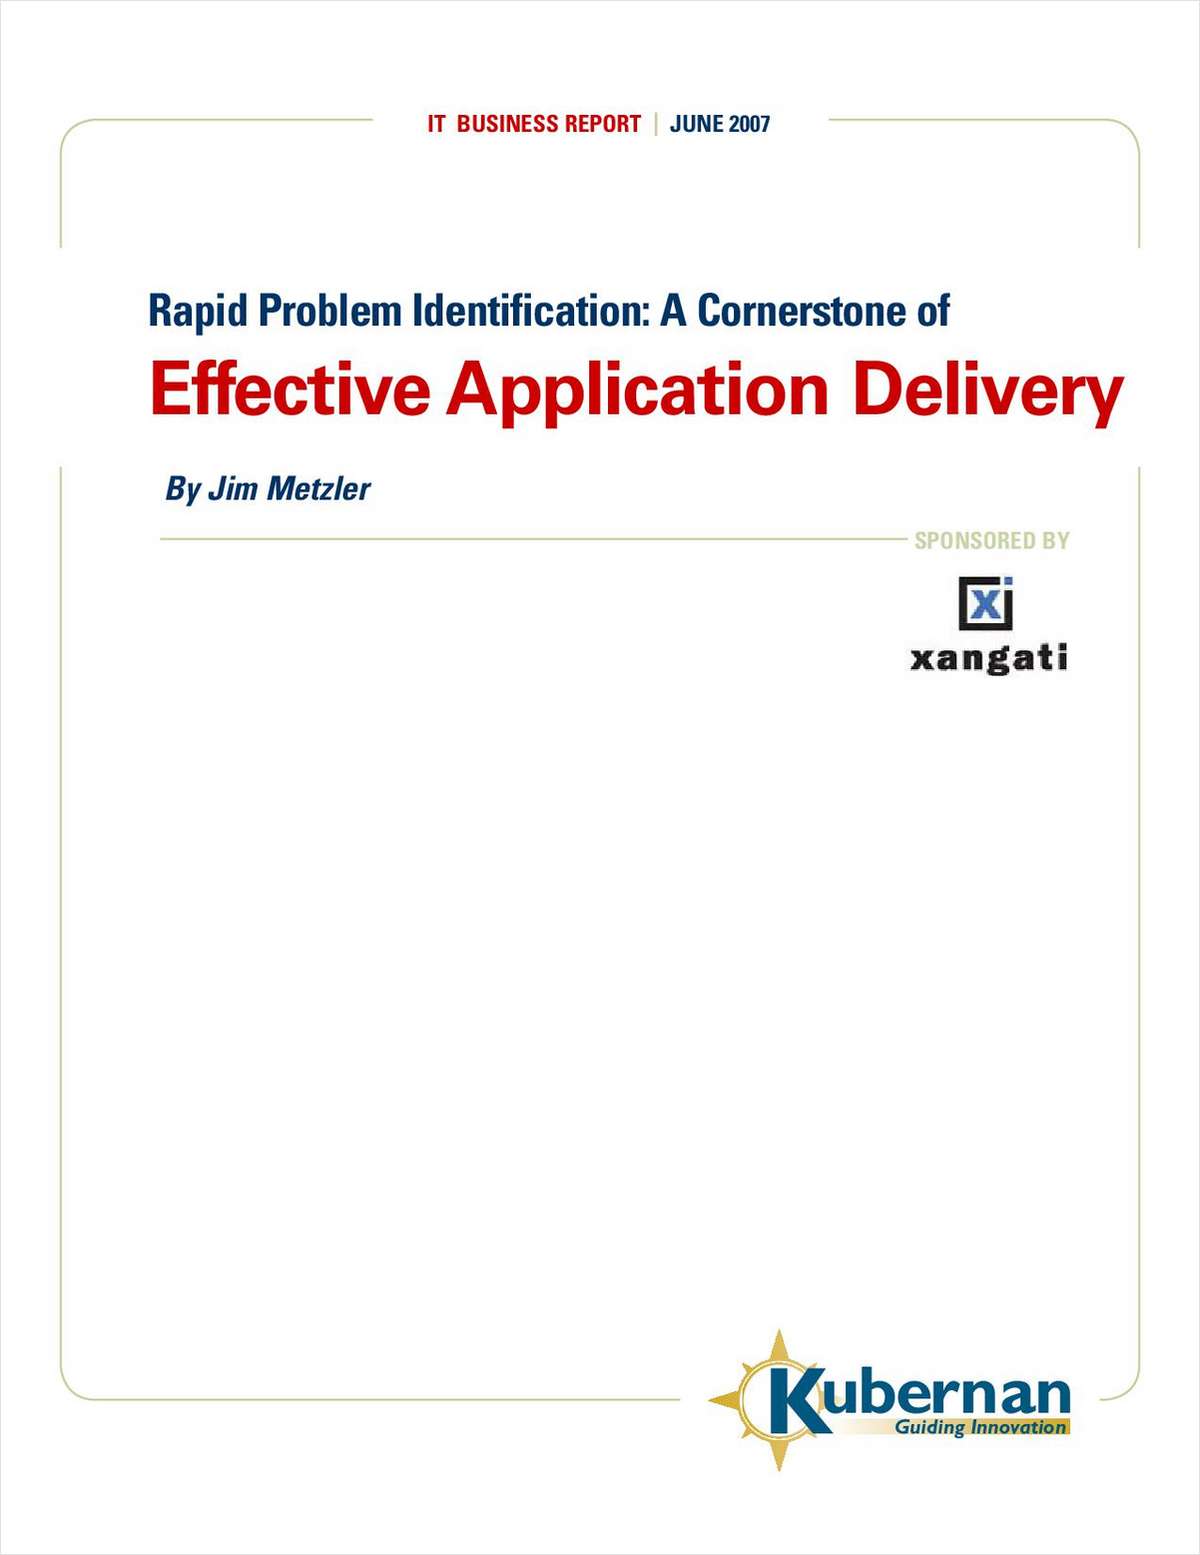 Rapid Problem Identification: A Cornerstone of Effective Application Delivery